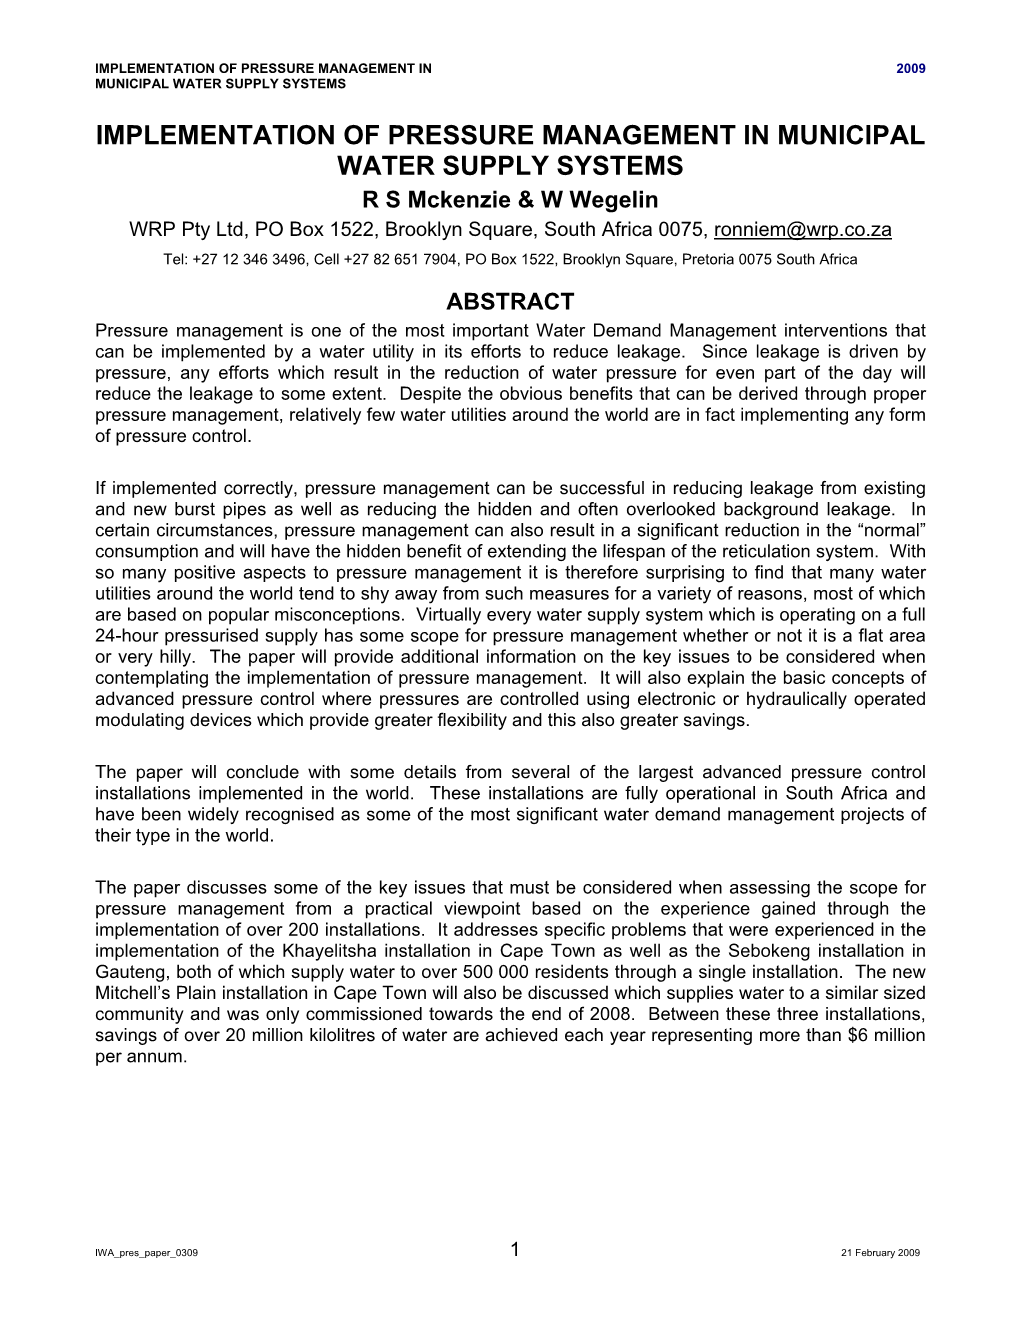 Implementation of Pressure Management in Municipal Water Supply Systems